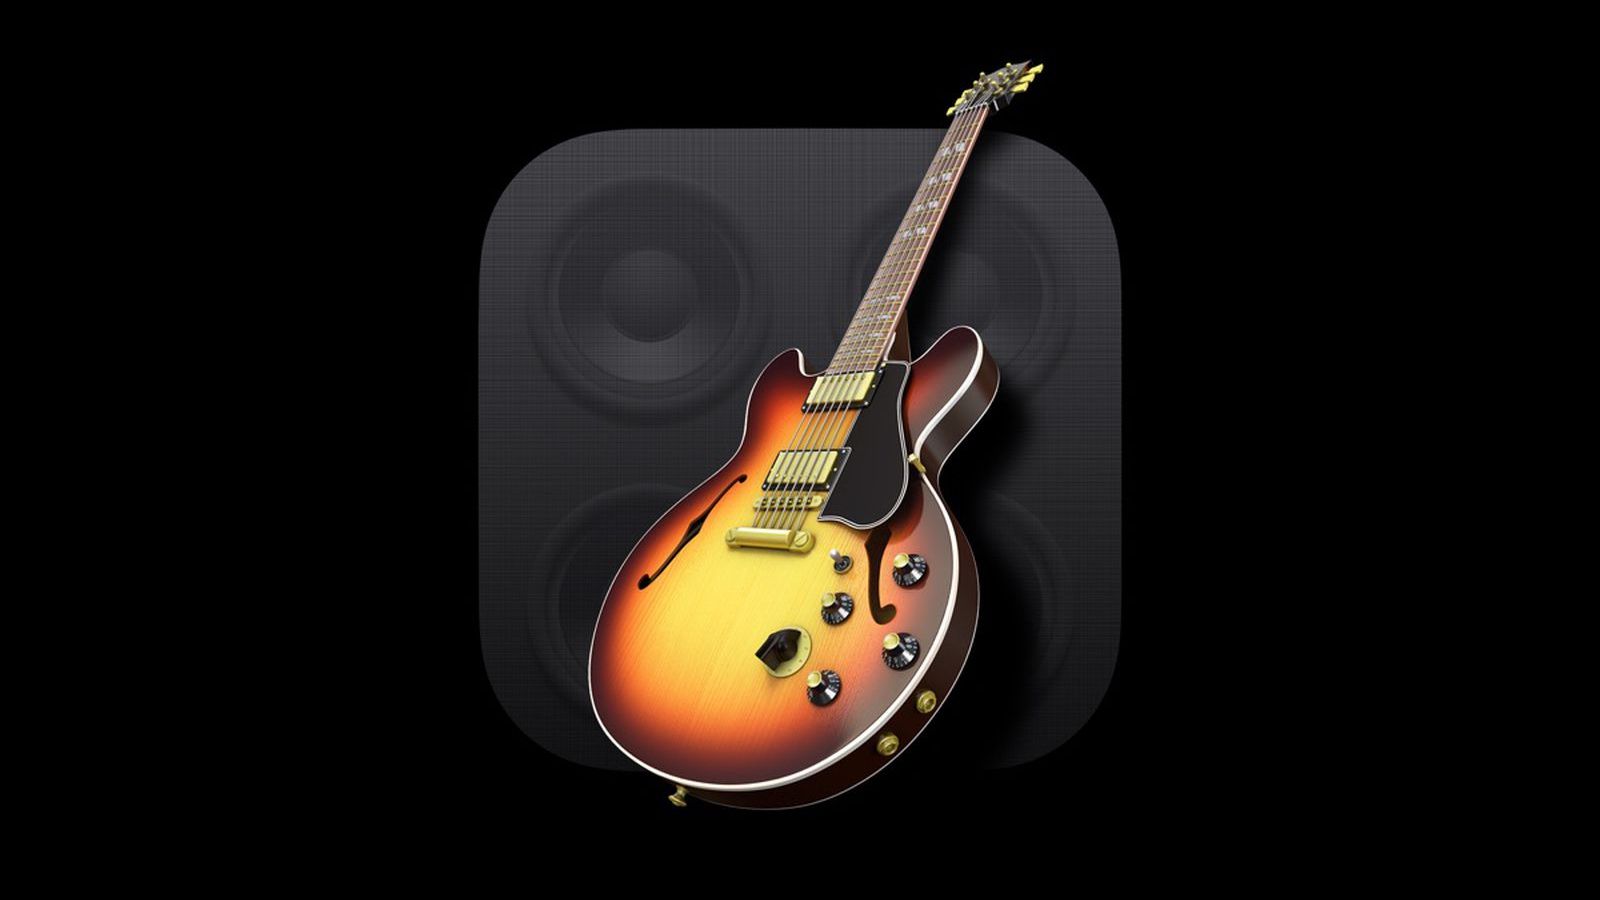 GarageBand for Mac Updated With Important Security Fix - macrumors.com